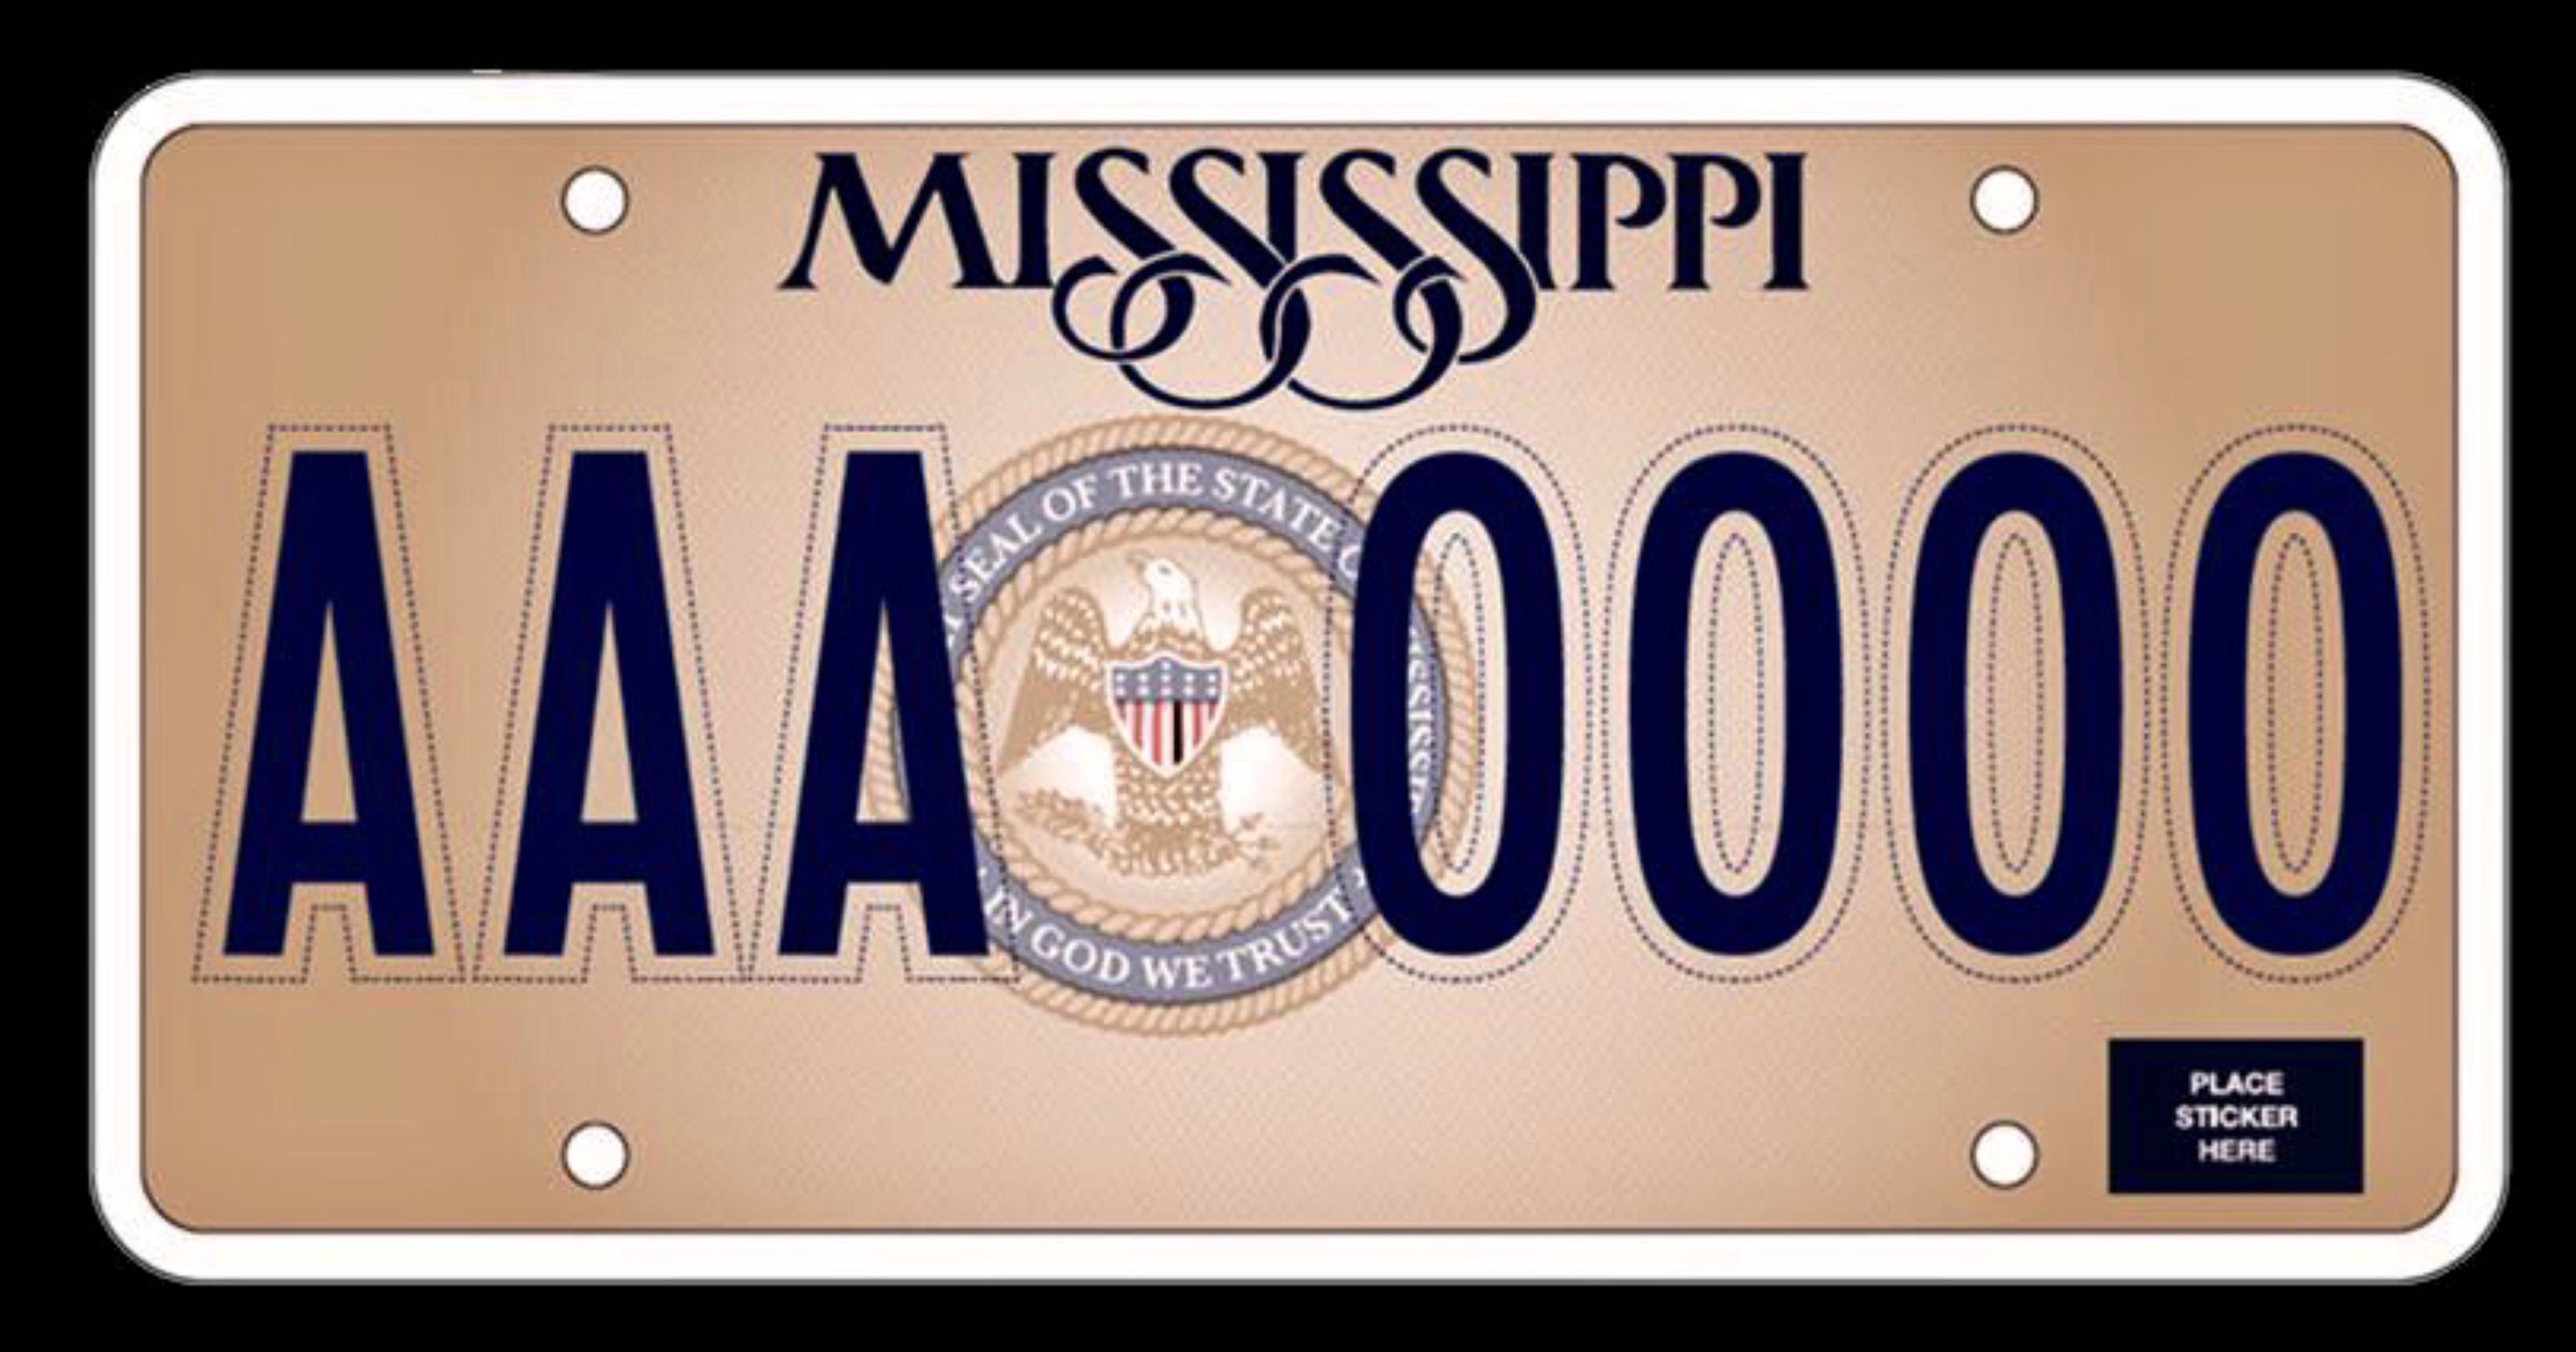 In God We Trust' will be on new Mississippi license plate